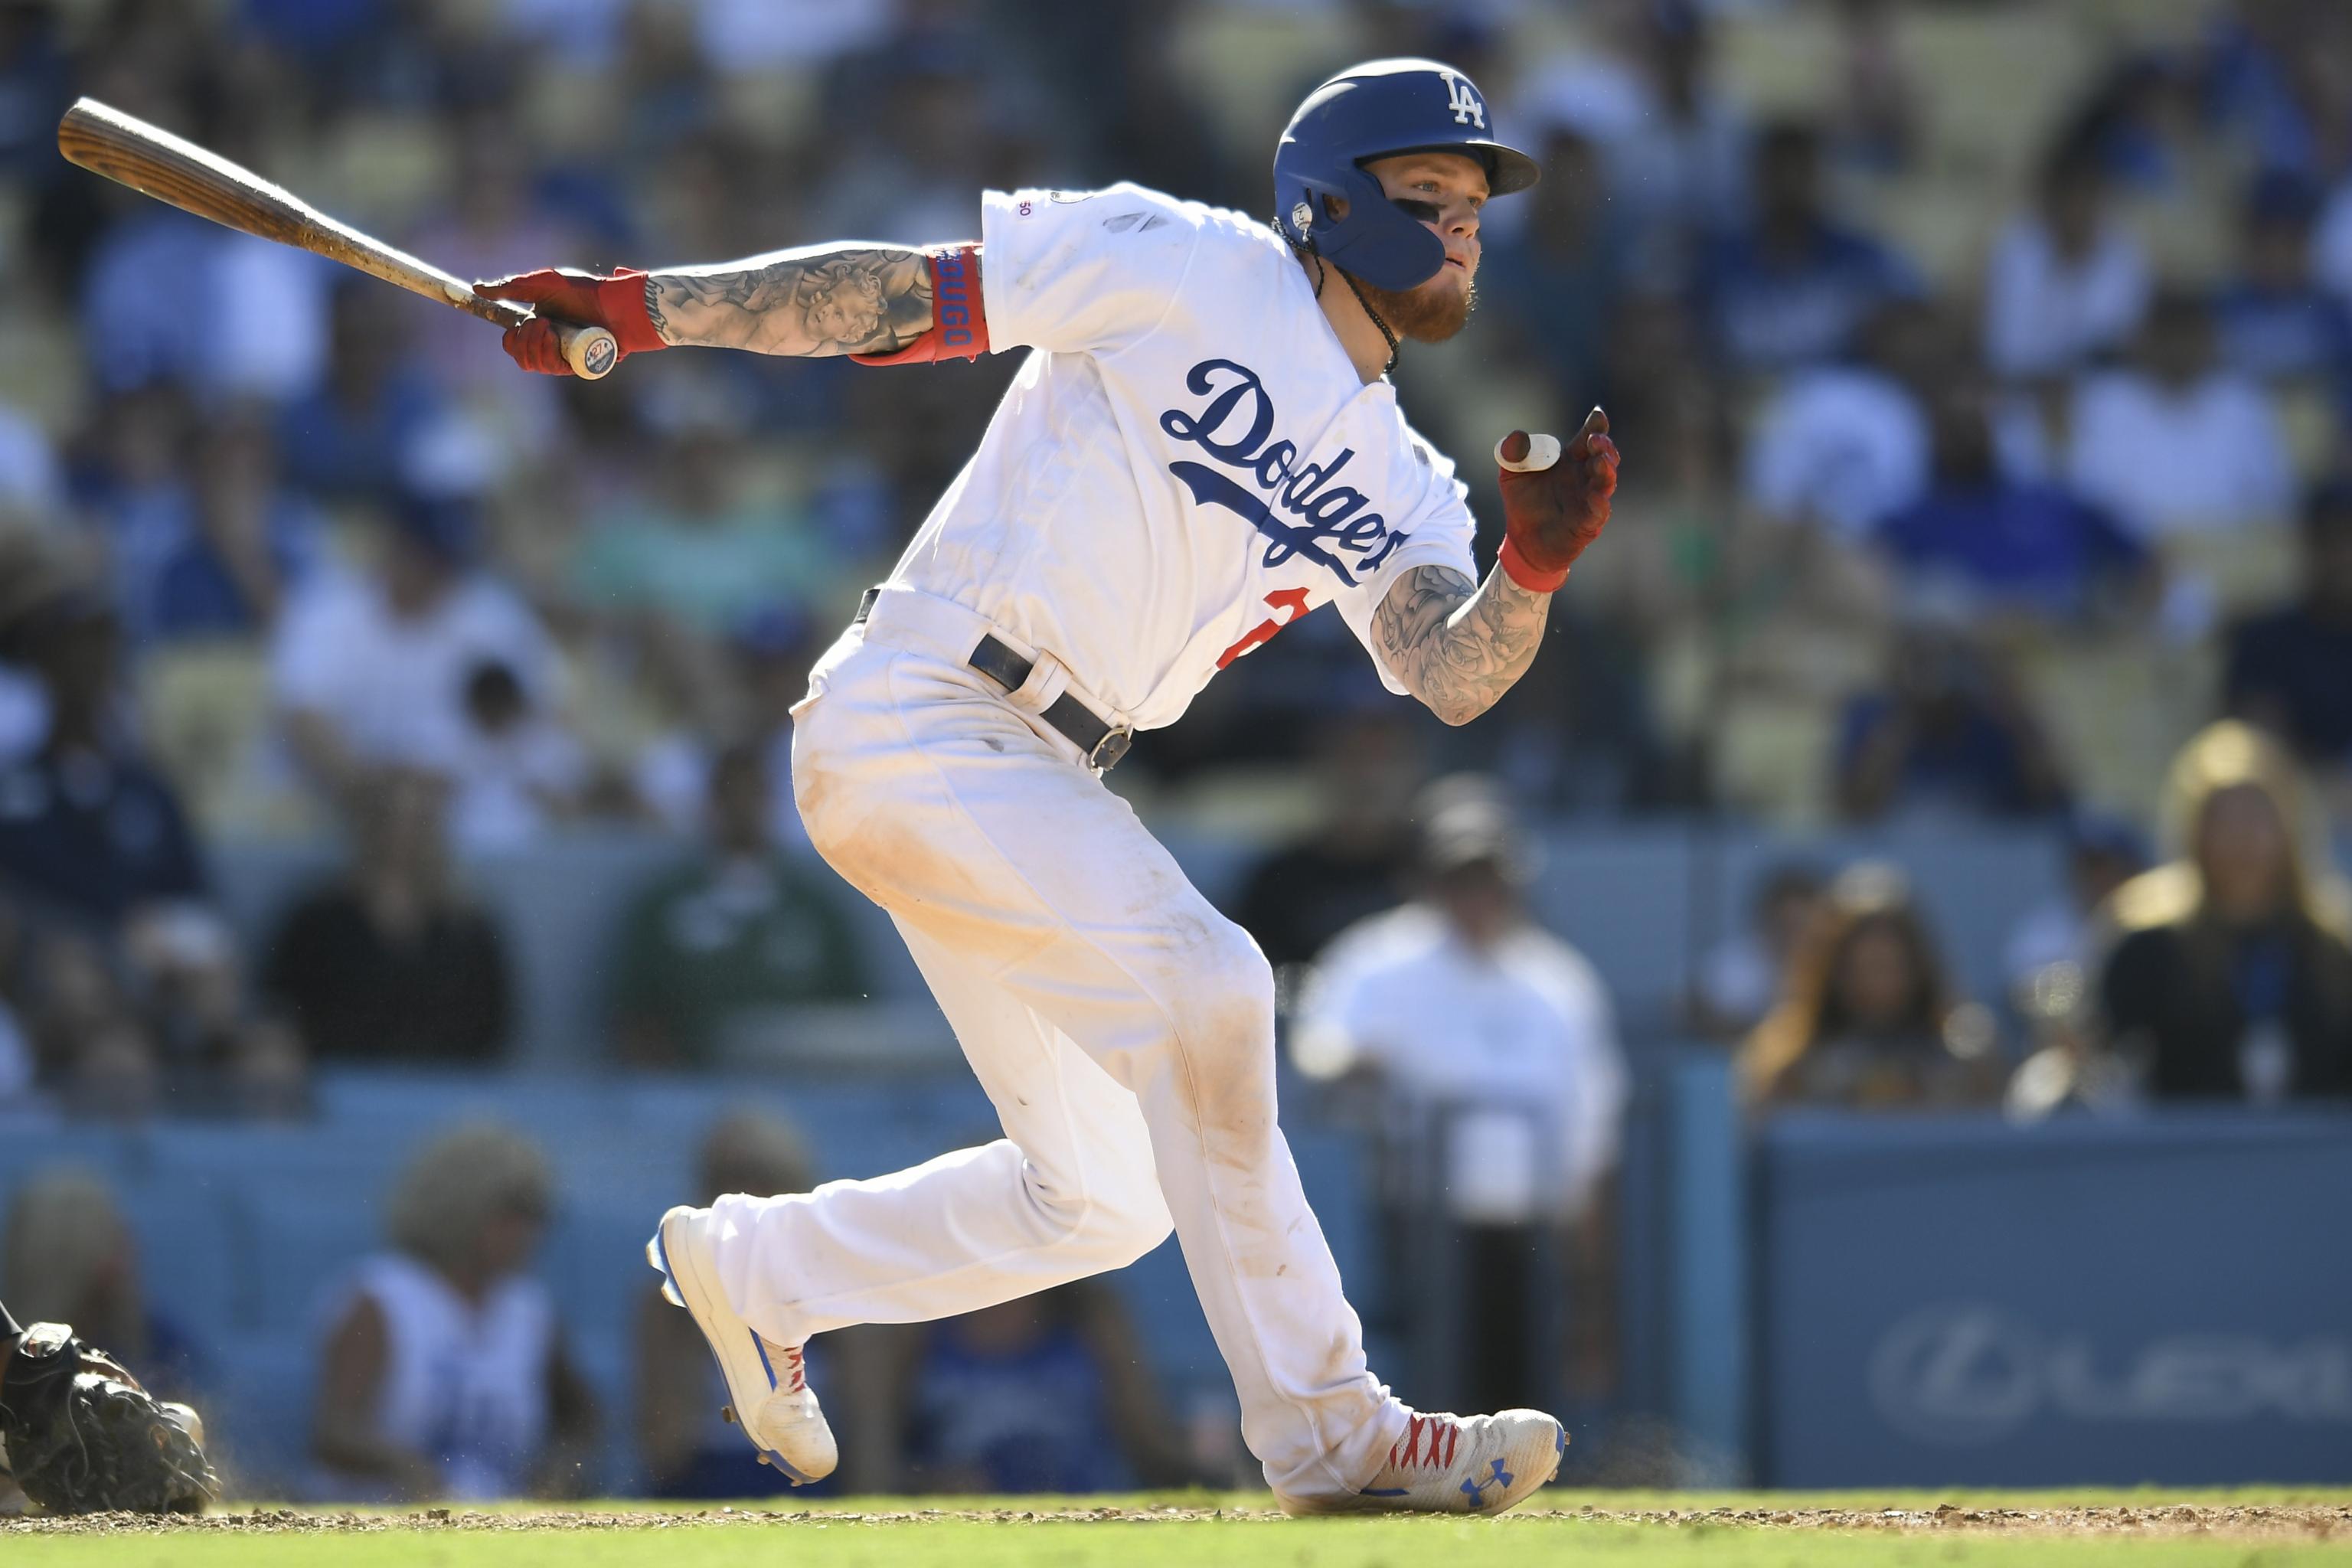 Potential Red Sox Lineups After Reported Kiké Hernández Signing 